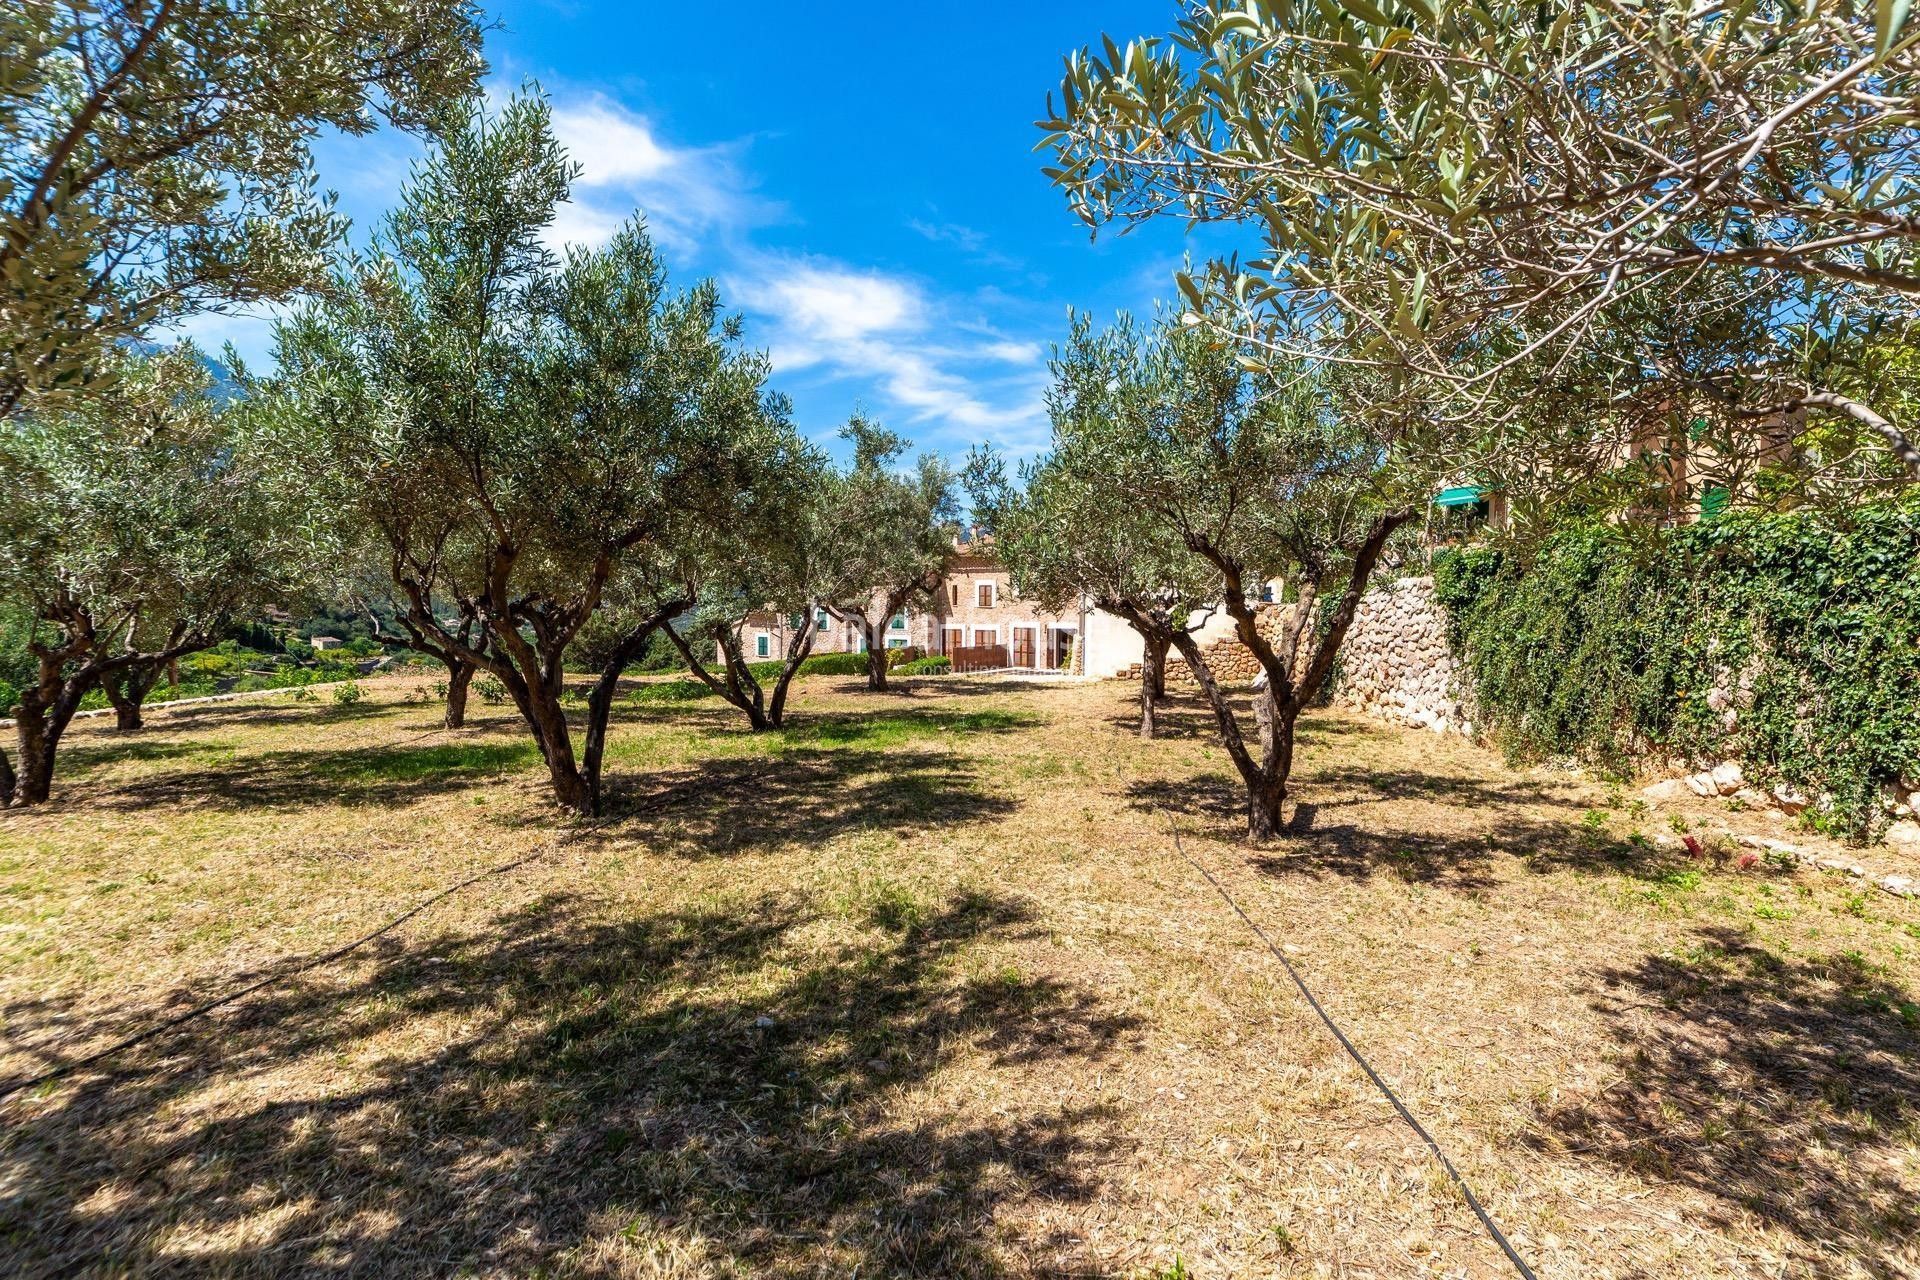 Charming new villa in Fornalutx with pool and stunning views of the Tramuntana